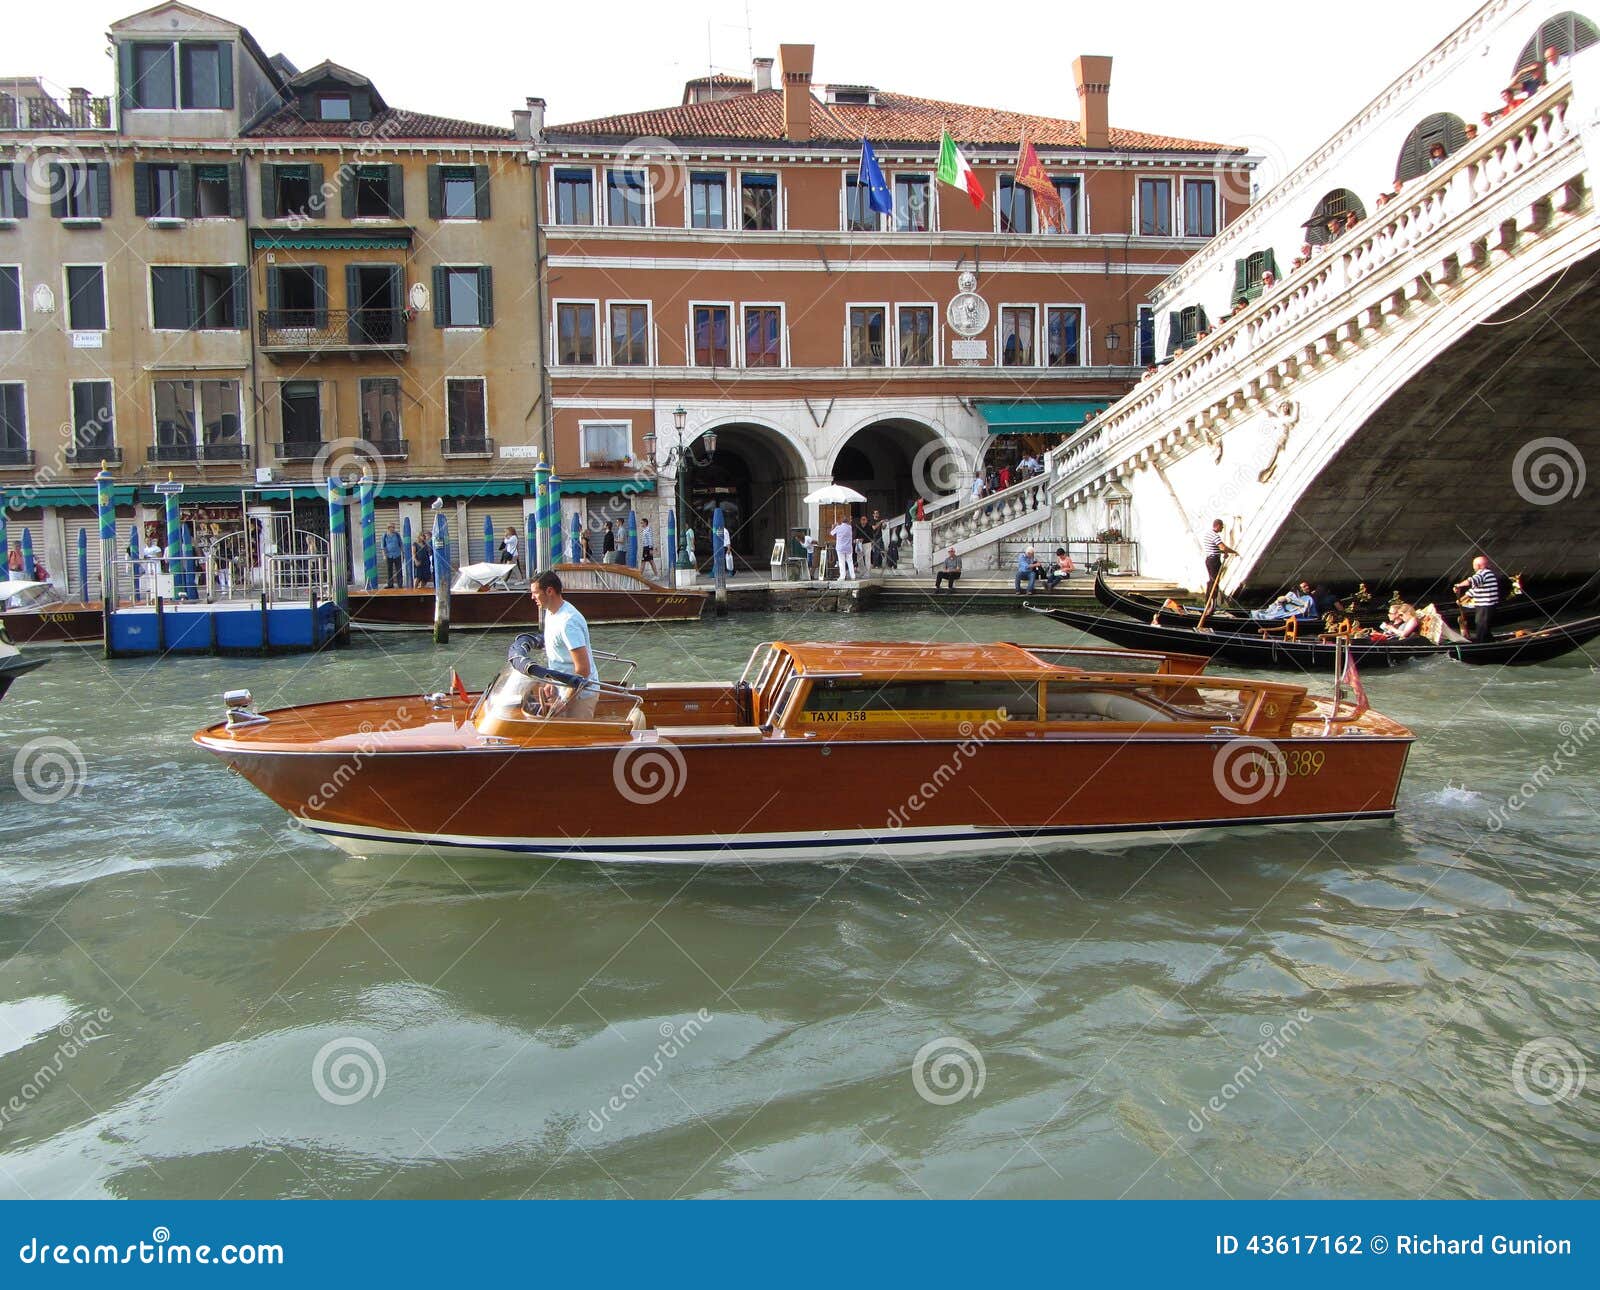 Venice Water Taxi At The Bridge Editorial Photography ...